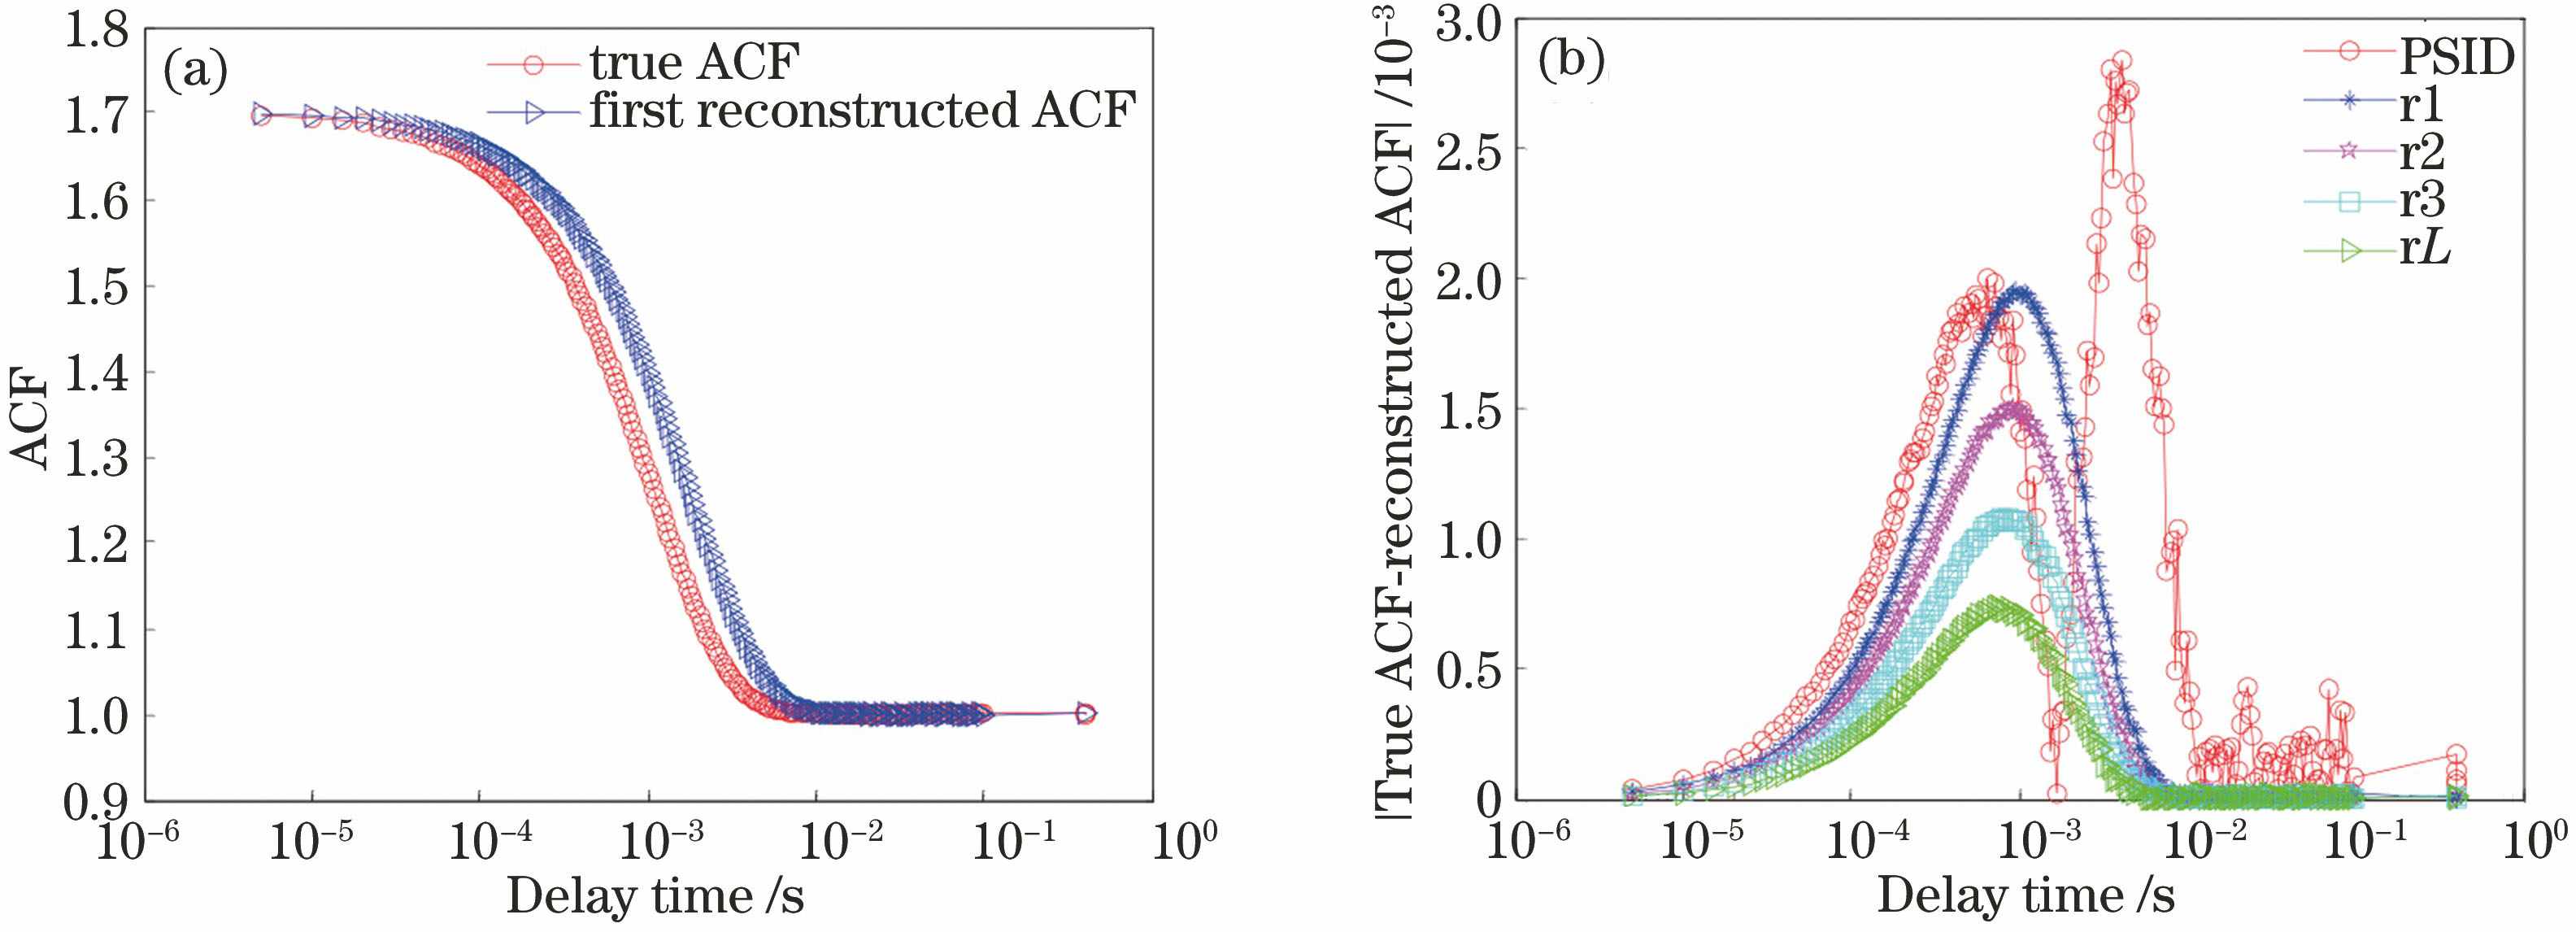 (a) True ACF and first reconstructed ACF of 300 nm/500 nm bimodal particles; (b) difference of true ACF from reconstructed ACF for once, twice, three times and L times